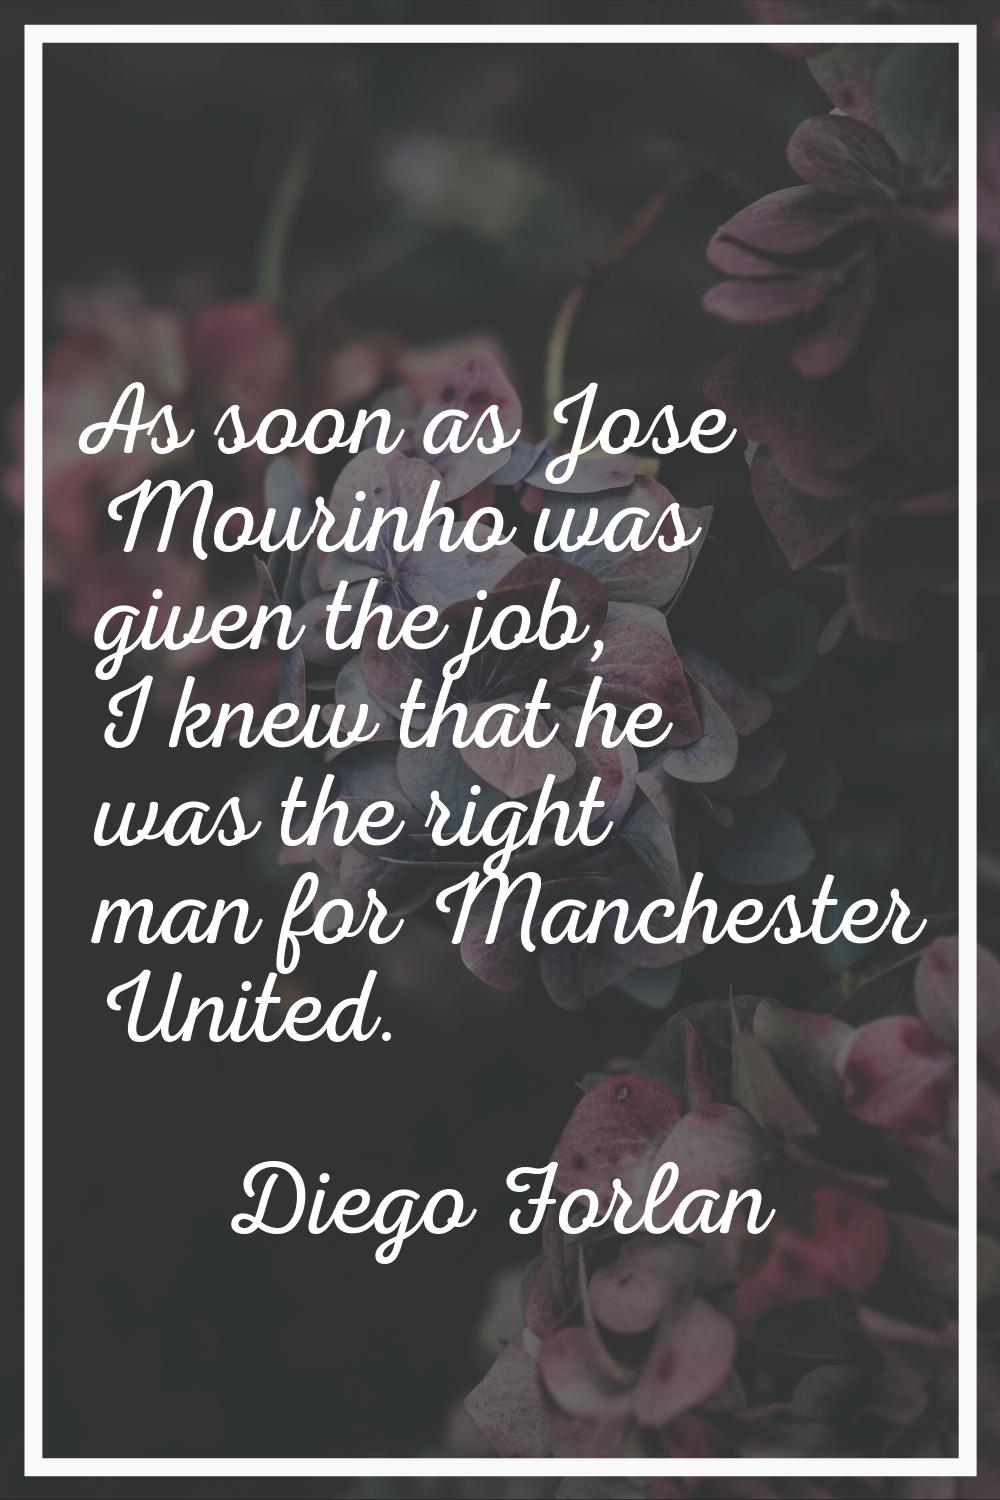 As soon as Jose Mourinho was given the job, I knew that he was the right man for Manchester United.